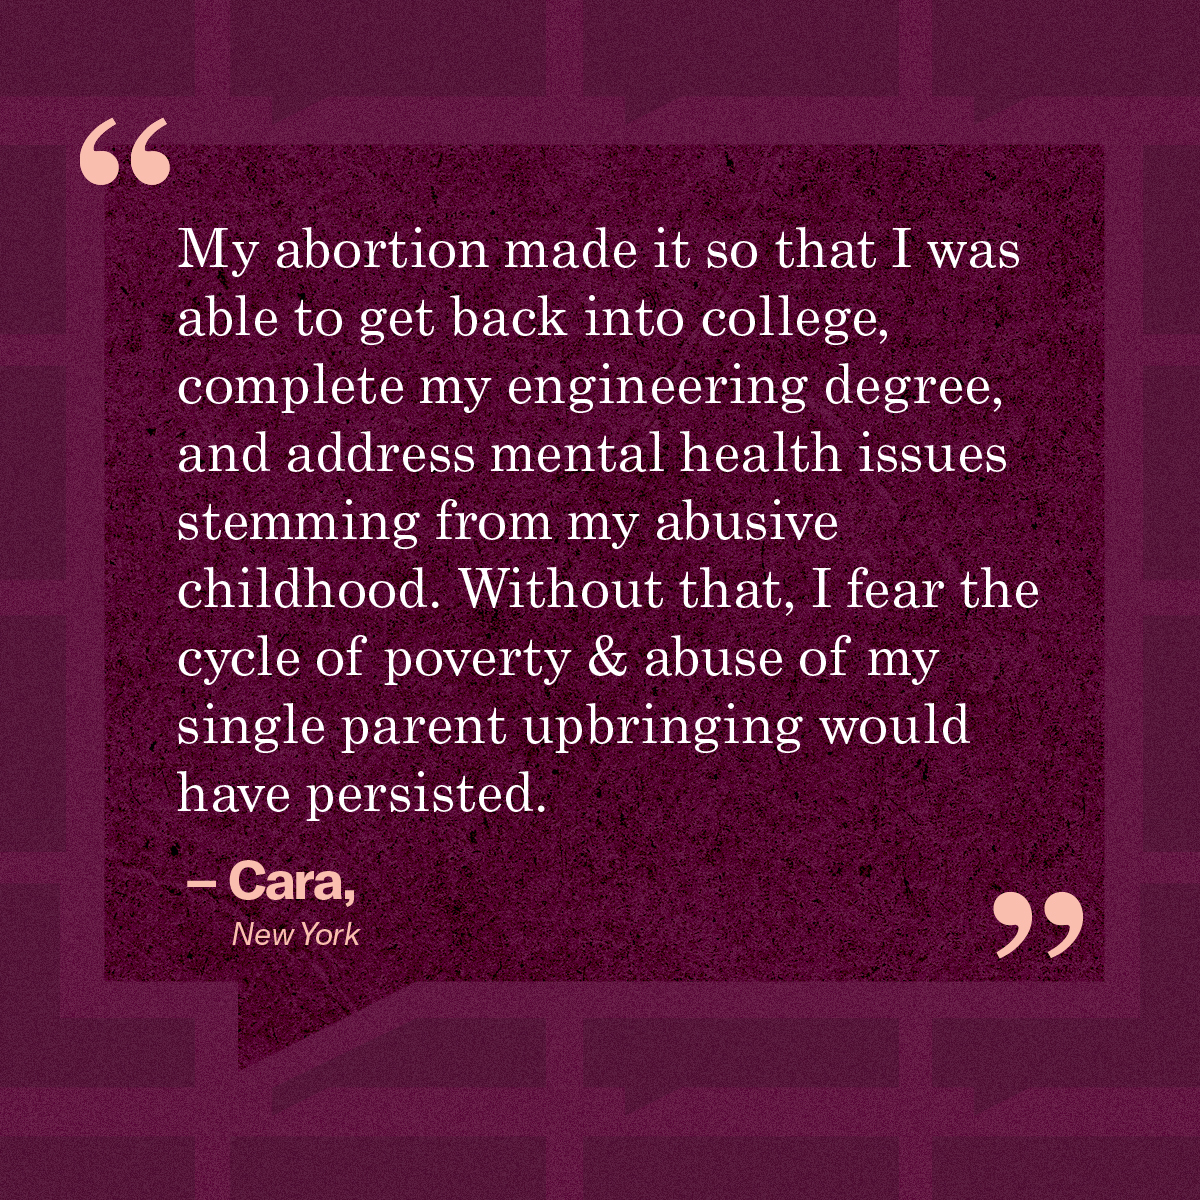 My abortion made it so that I was able to get back into college, complete my engineering degree, and address mental health issues stemming from my abusive childhood. Without that, I fear the cycle of poverty & abuse of my single parent upbringing would have persisted.” – Cara, New Jersey